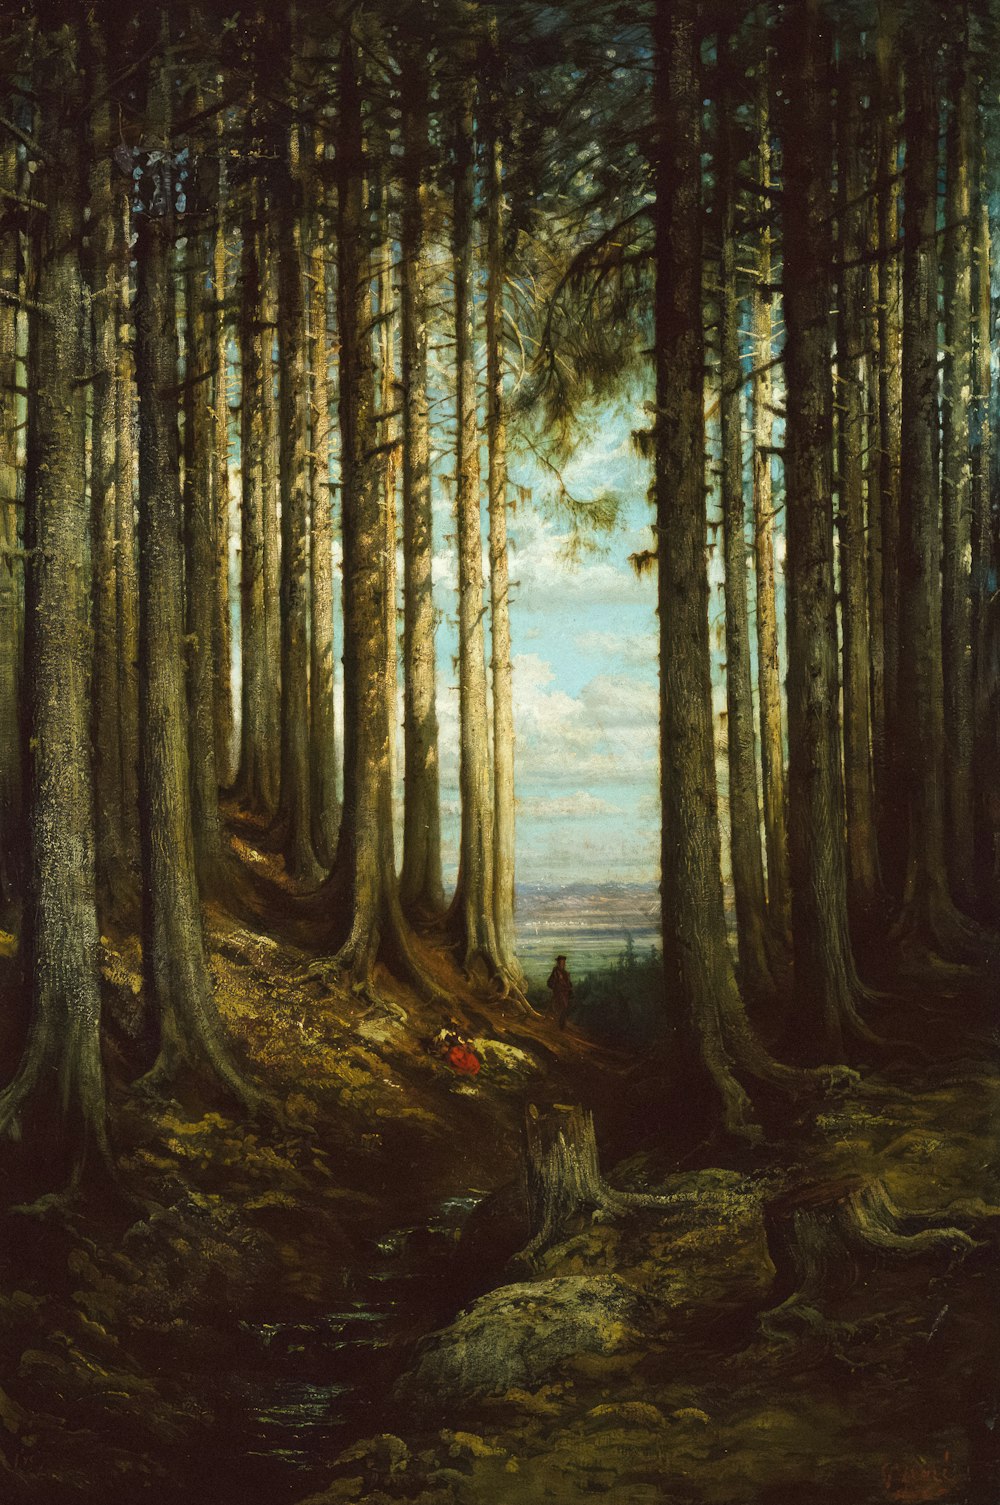 a painting of a forest with a man sitting in the middle of the woods